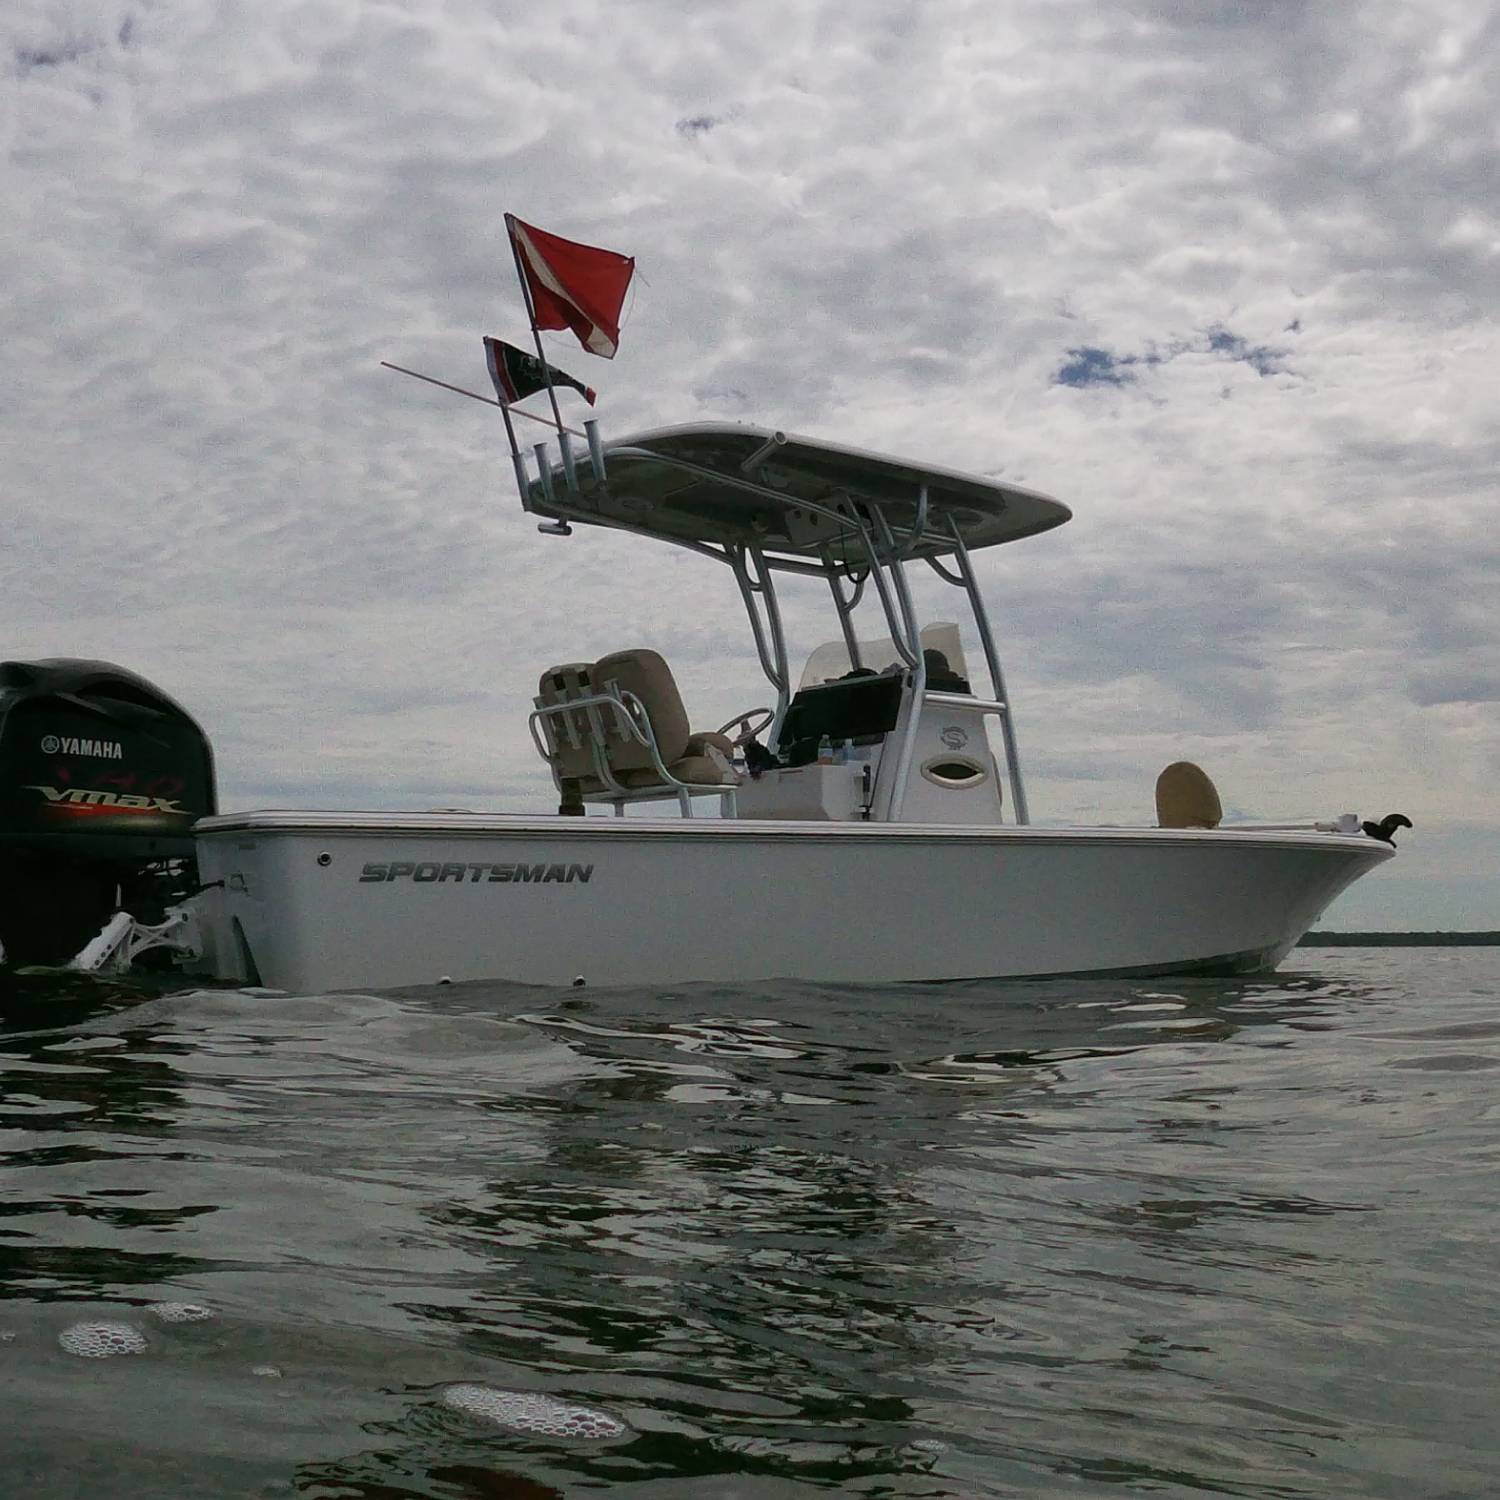 Title: Scalloping - On board their Sportsman Masters 247 Bay Boat - Location: Steinhatchee, FL. Participating in the Photo Contest #SportsmanAugust2023